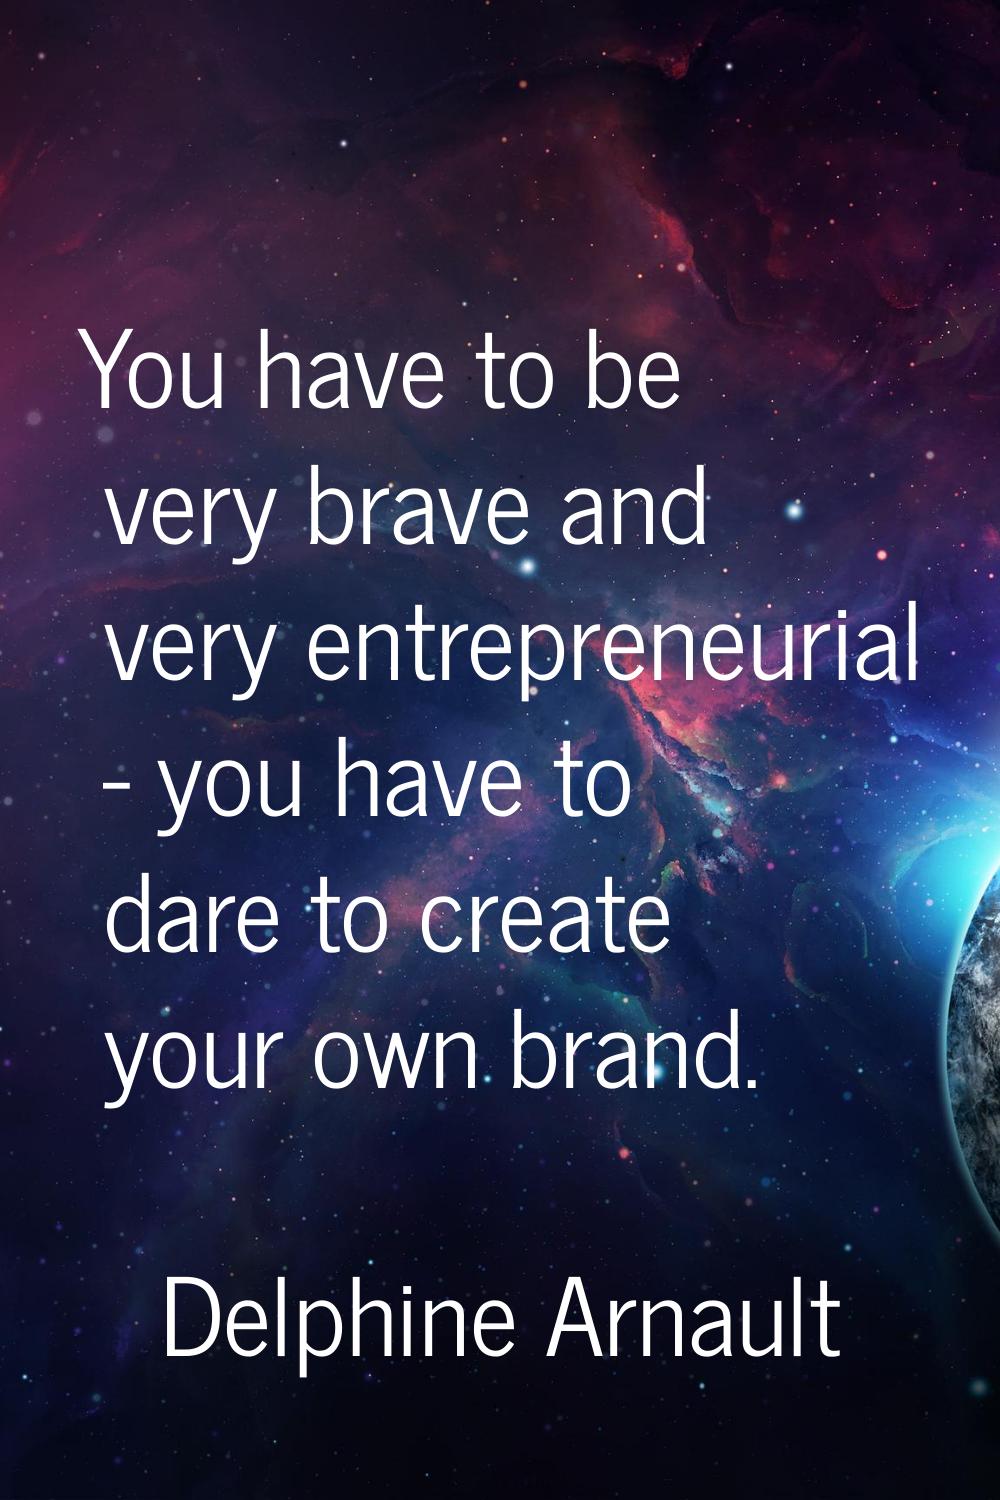 You have to be very brave and very entrepreneurial - you have to dare to create your own brand.